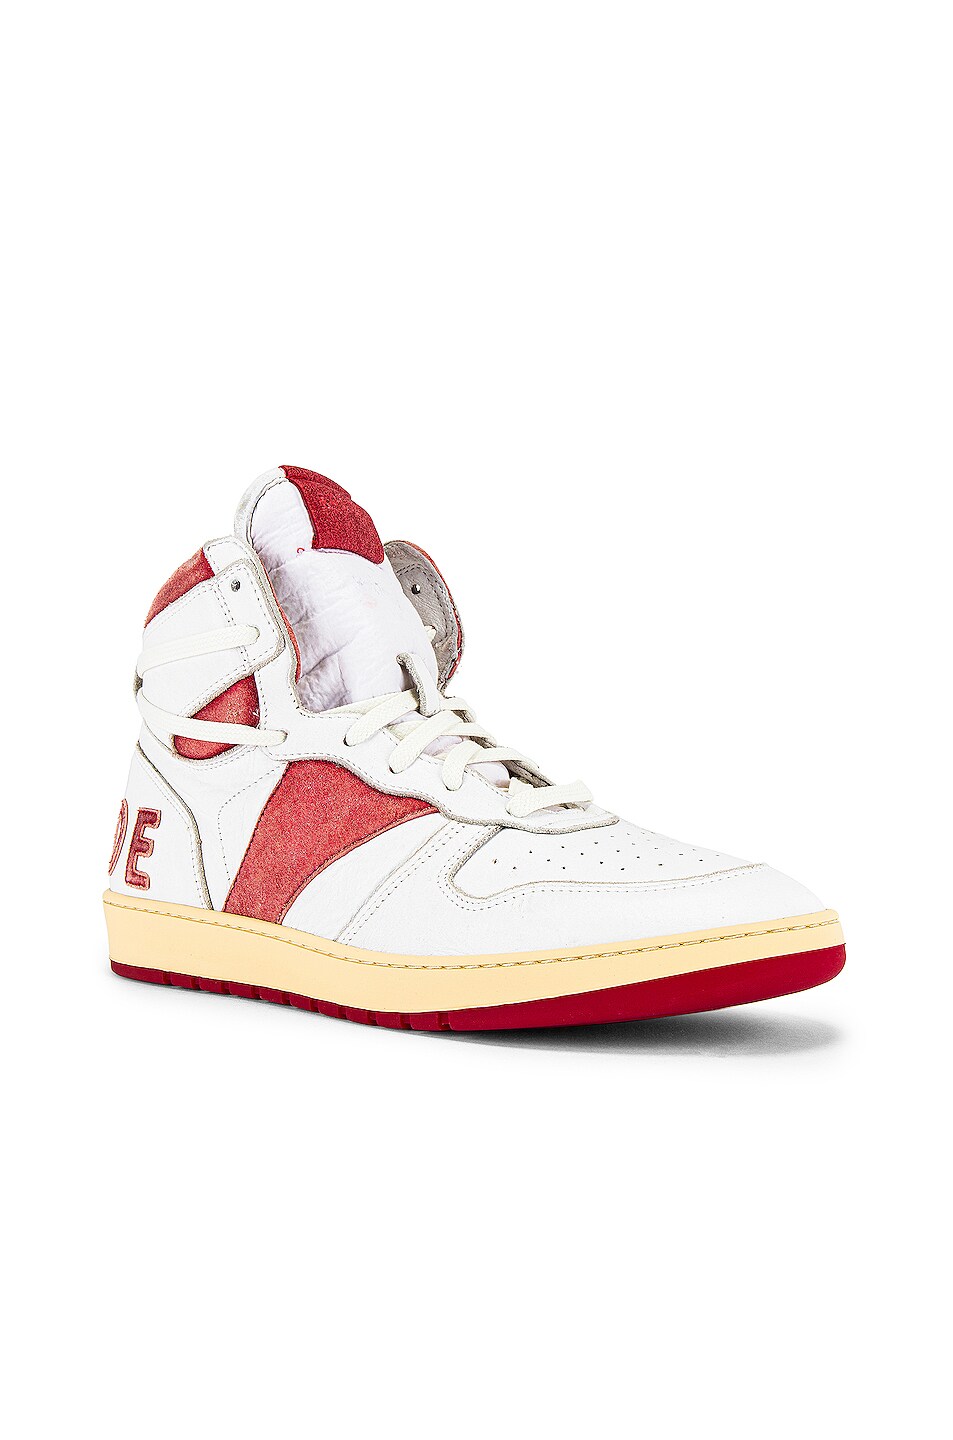 Image 1 of Rhude Bball Hi Sneaker in White Leather & Red